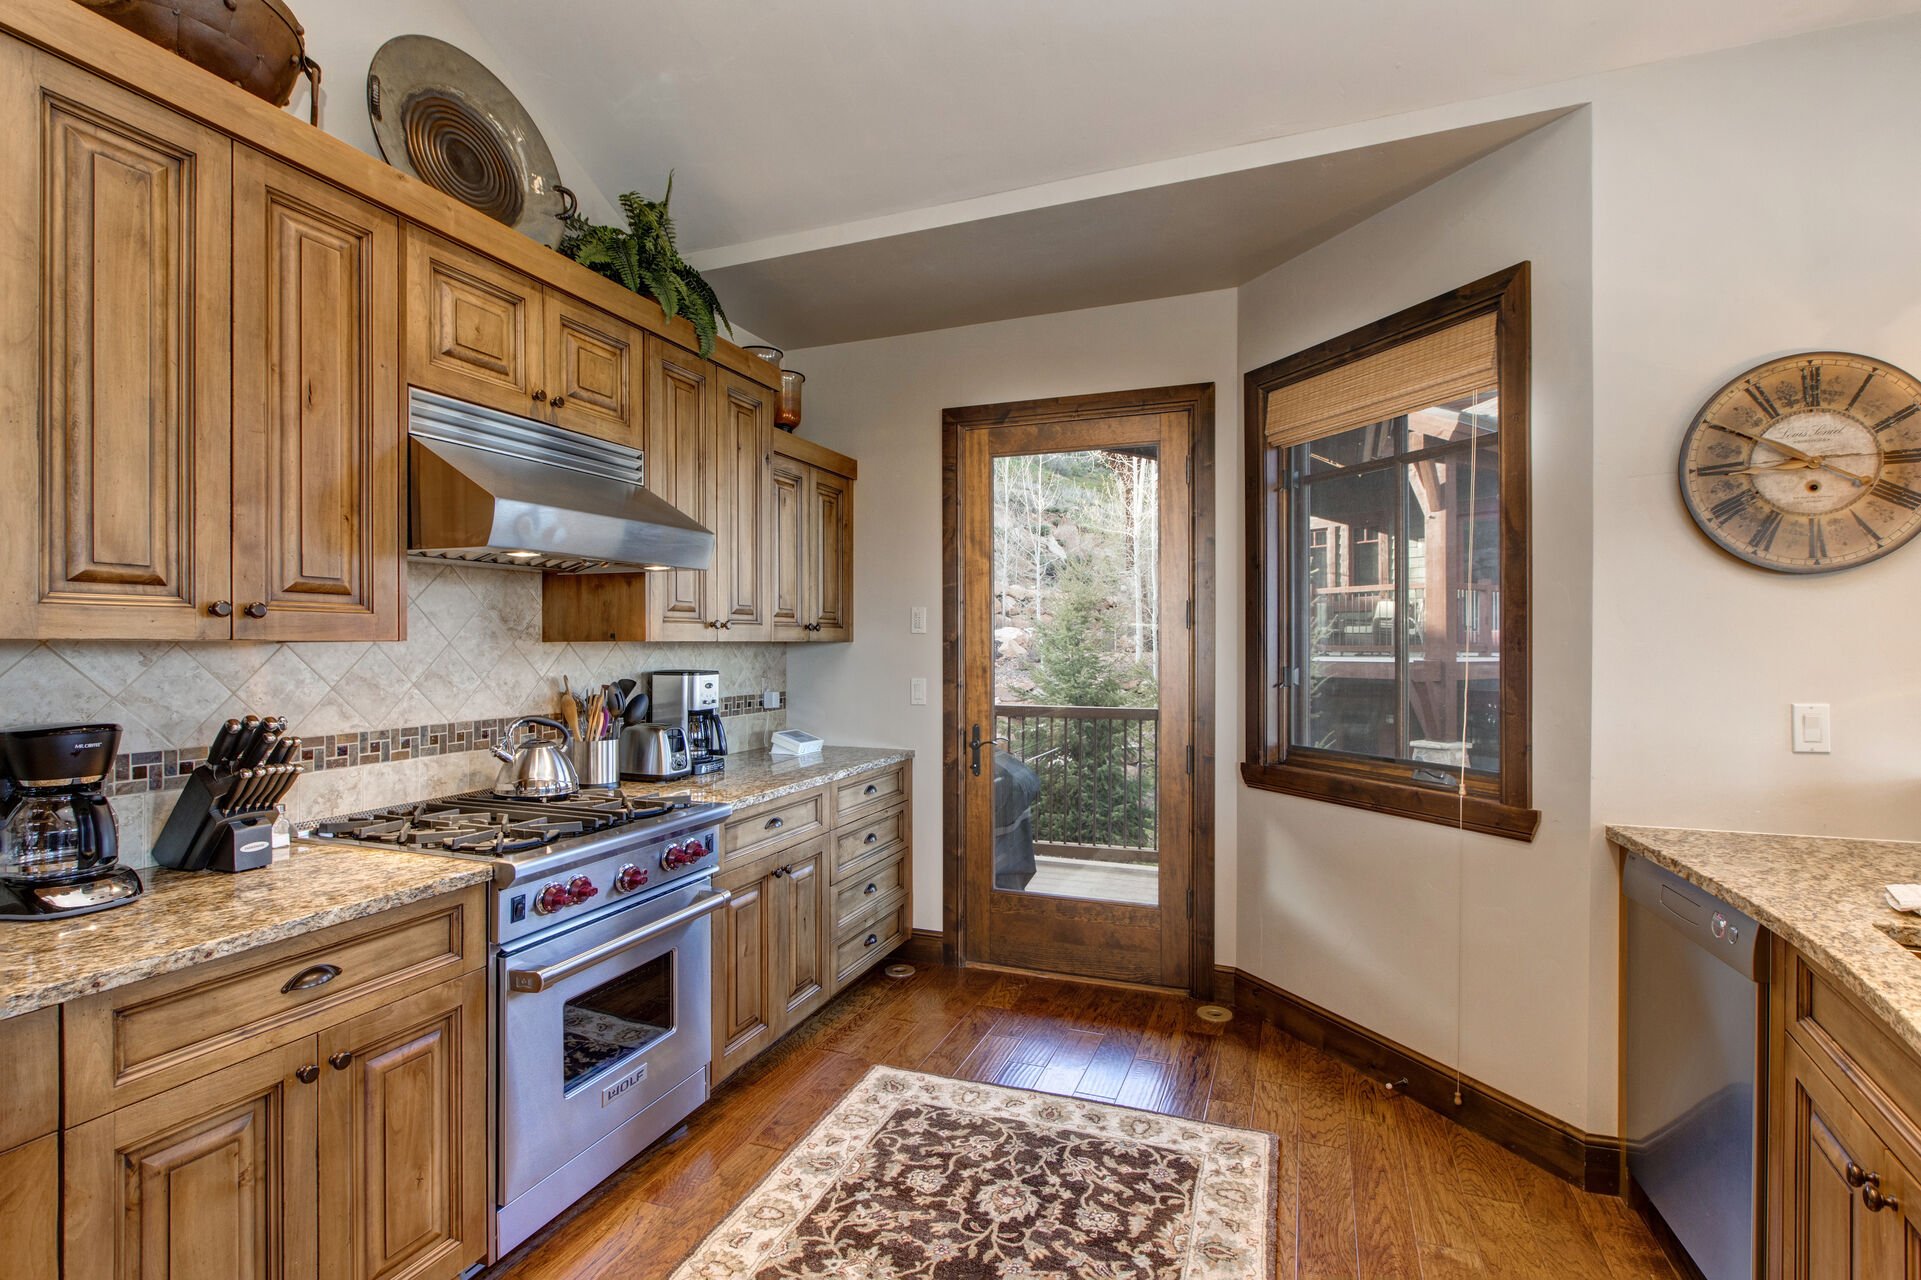 Fully Equipped Kitchen with Stainless steel, high-end appliances, Sub-Zero Fridge, Bar Seating for 3, Granite Countertops, and Private Porch access with BBQ Grill.